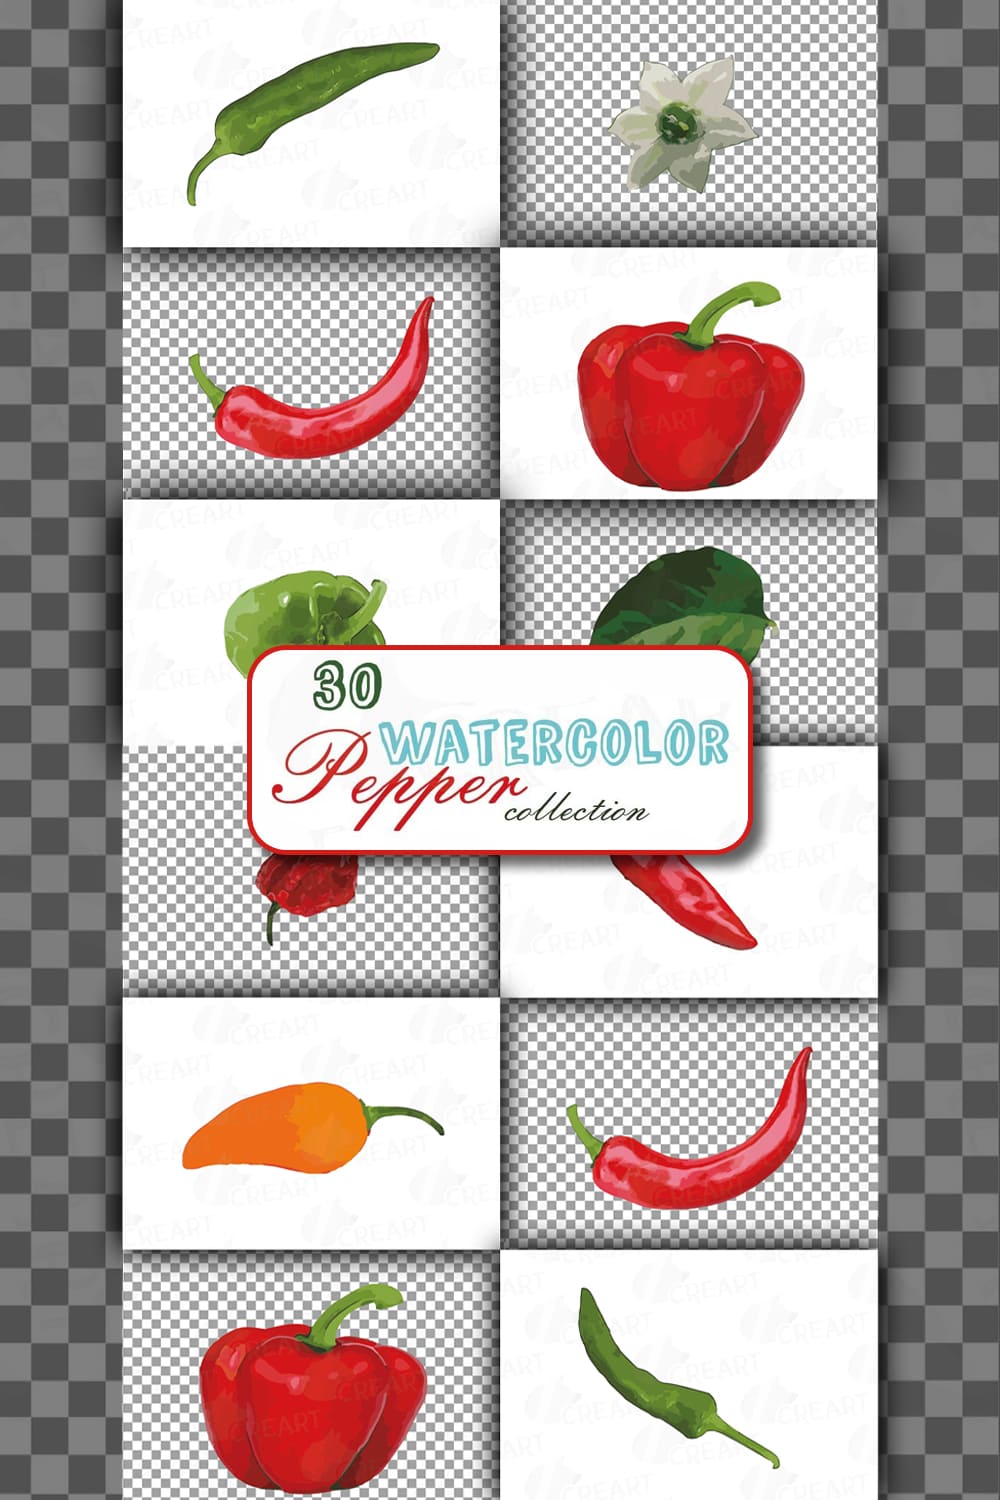 122391 watercolor peppers clip art pack green and colorful peppers pinterest 1000 1500